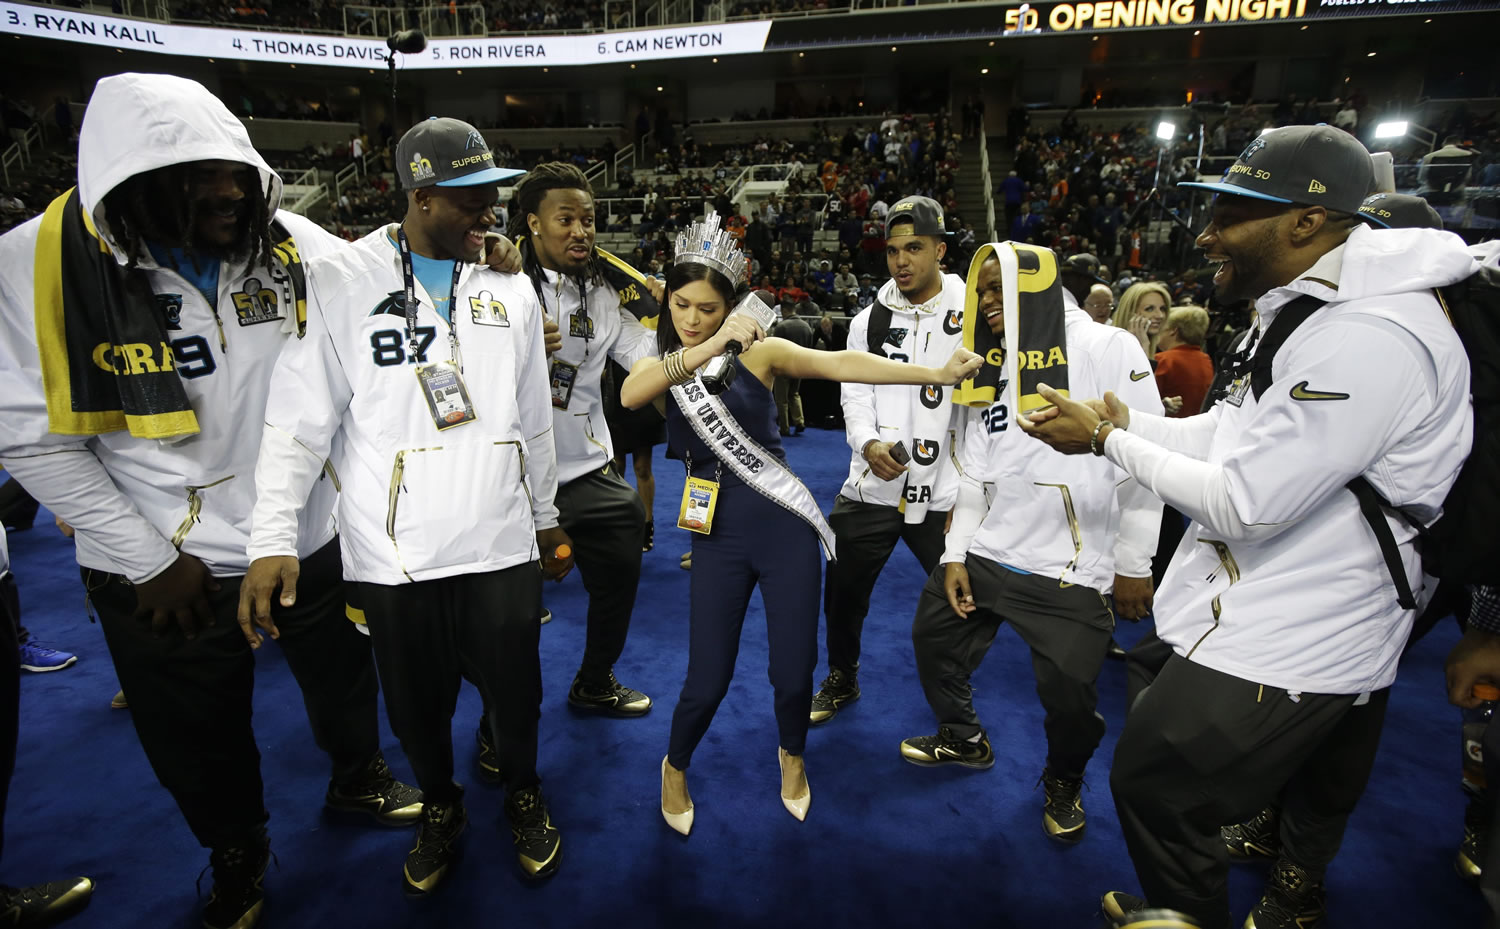 Miss Universe Pia Alonzo Wurtzbach dances with Carolina Panthers players during Opening Night for the NFL Super Bowl 50 football game Monday, Feb. 1, 2016, in San Jose, Calif.